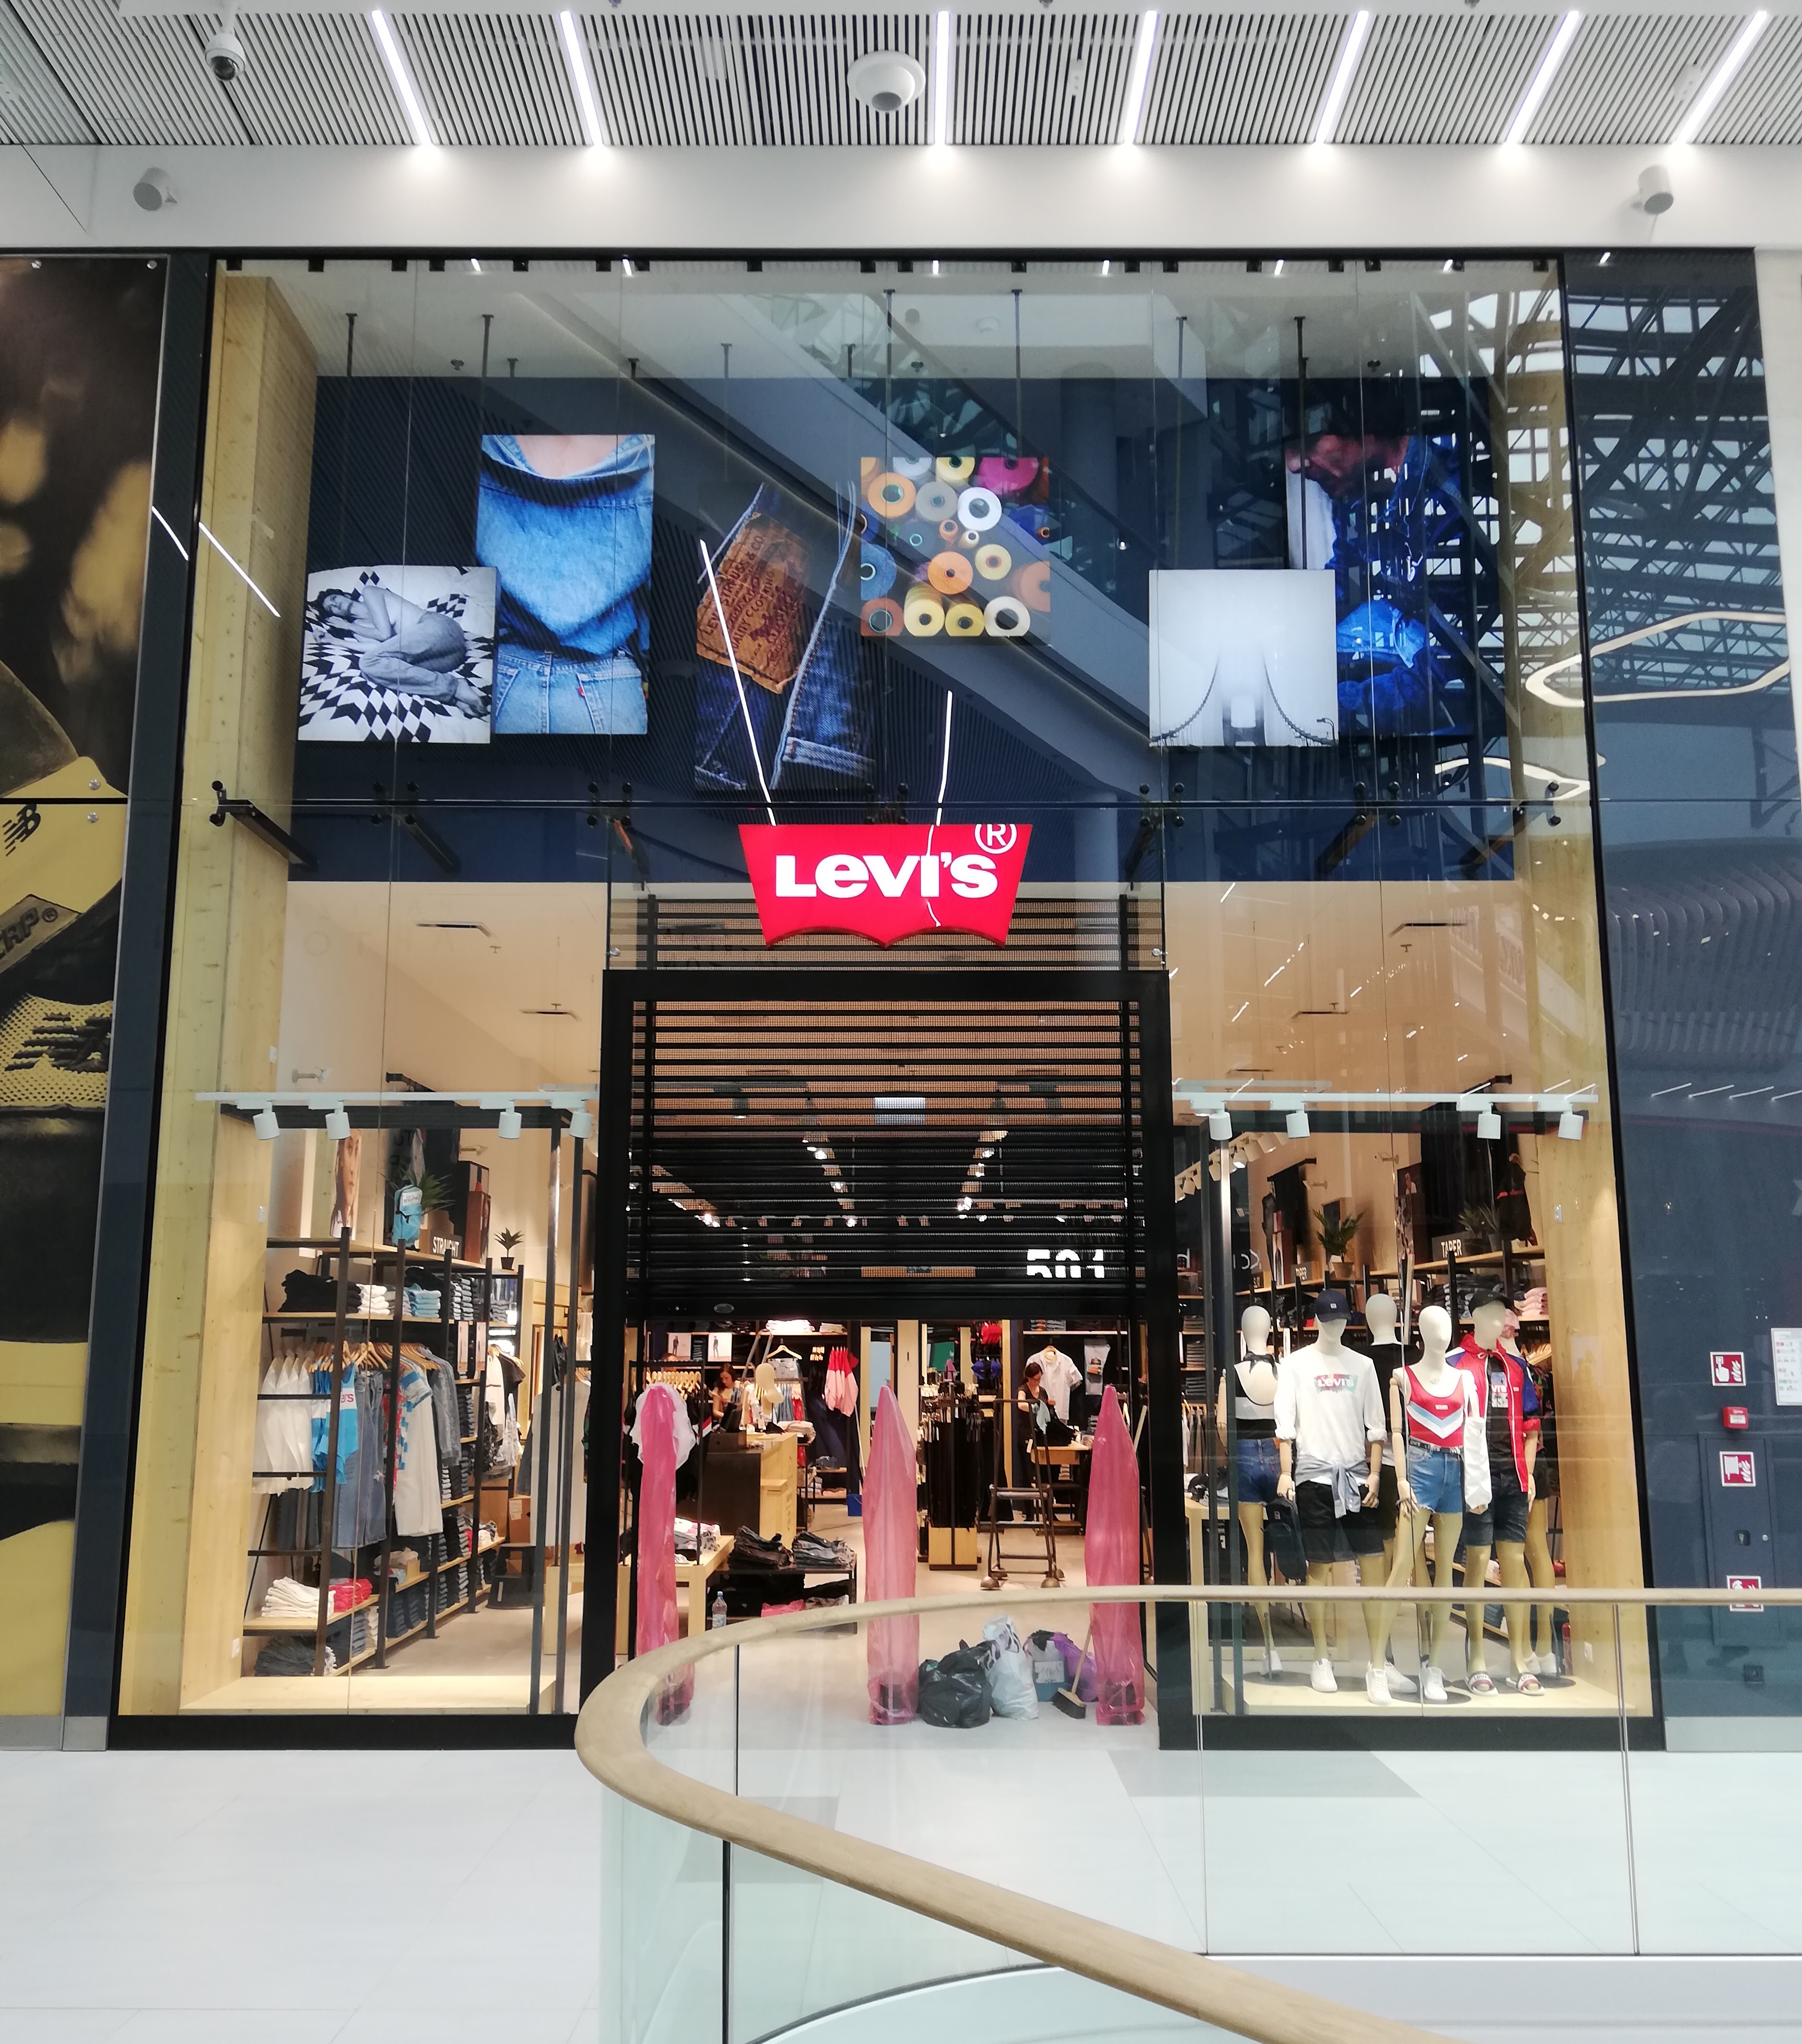 New productions for the Levi's brand in Poland